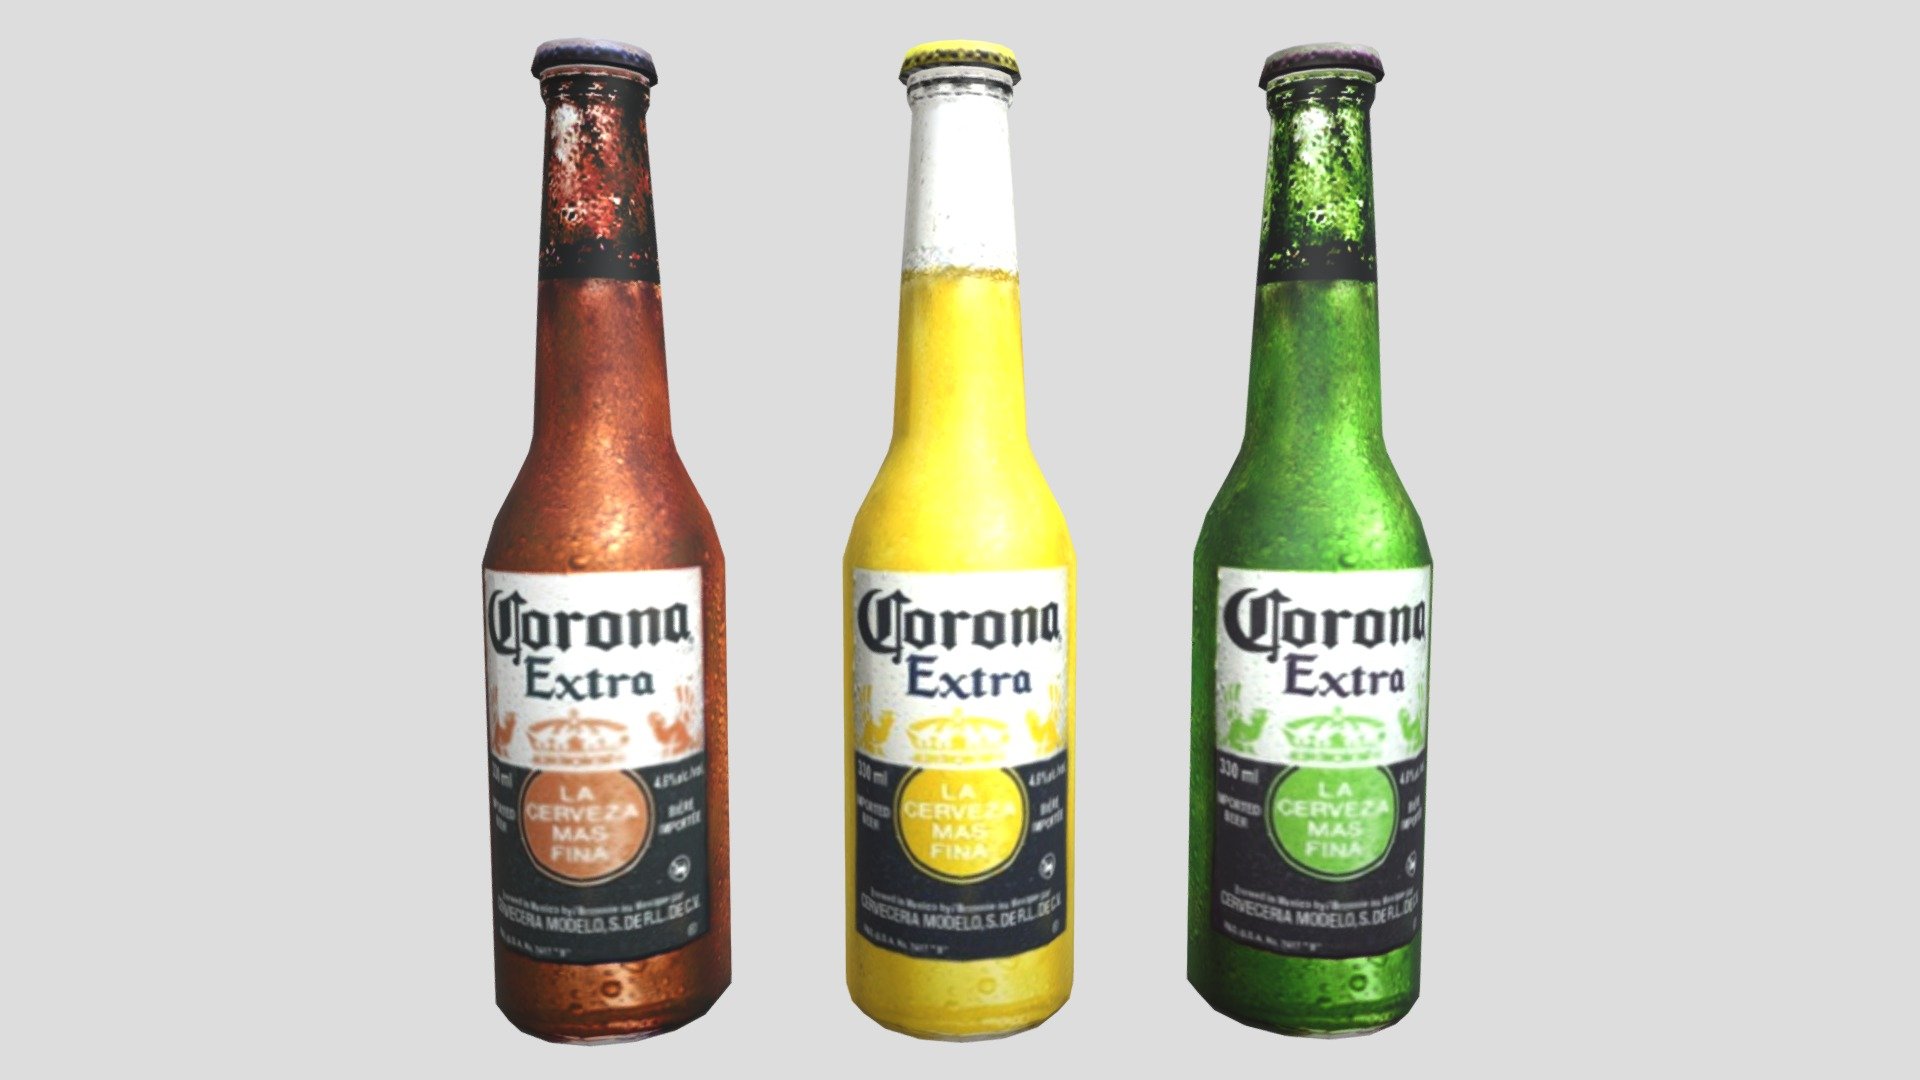 Corona beer! ^^
Just a free low poly model i created in Blender for some little project (map) and it's free to use! ^^!

The model has 3 textures with 3 diffrent colors: (brown, yellow and green) each texture is 512x512 size! ^^

The model has: (for each bottle)




Verts: 210.

Faces: 224.

Tris: 416.

The zip file contains:




3 textures and the UV texture.

1 Photoshop file (*.PSD)

1 Blender file. (*.BLEND)

1 Simple file verification (*.SFV)

Enjoy the model! ^^ You can use it freely with your projects for games or art or whatever you want! ^^

Feel free to modify the model / textures and / or add more textures if you want.




You can credit me if you want i don't really care. ^^
 - Corona Beer - Low Poly - Download Free 3D model by Liorlevi99 3d model